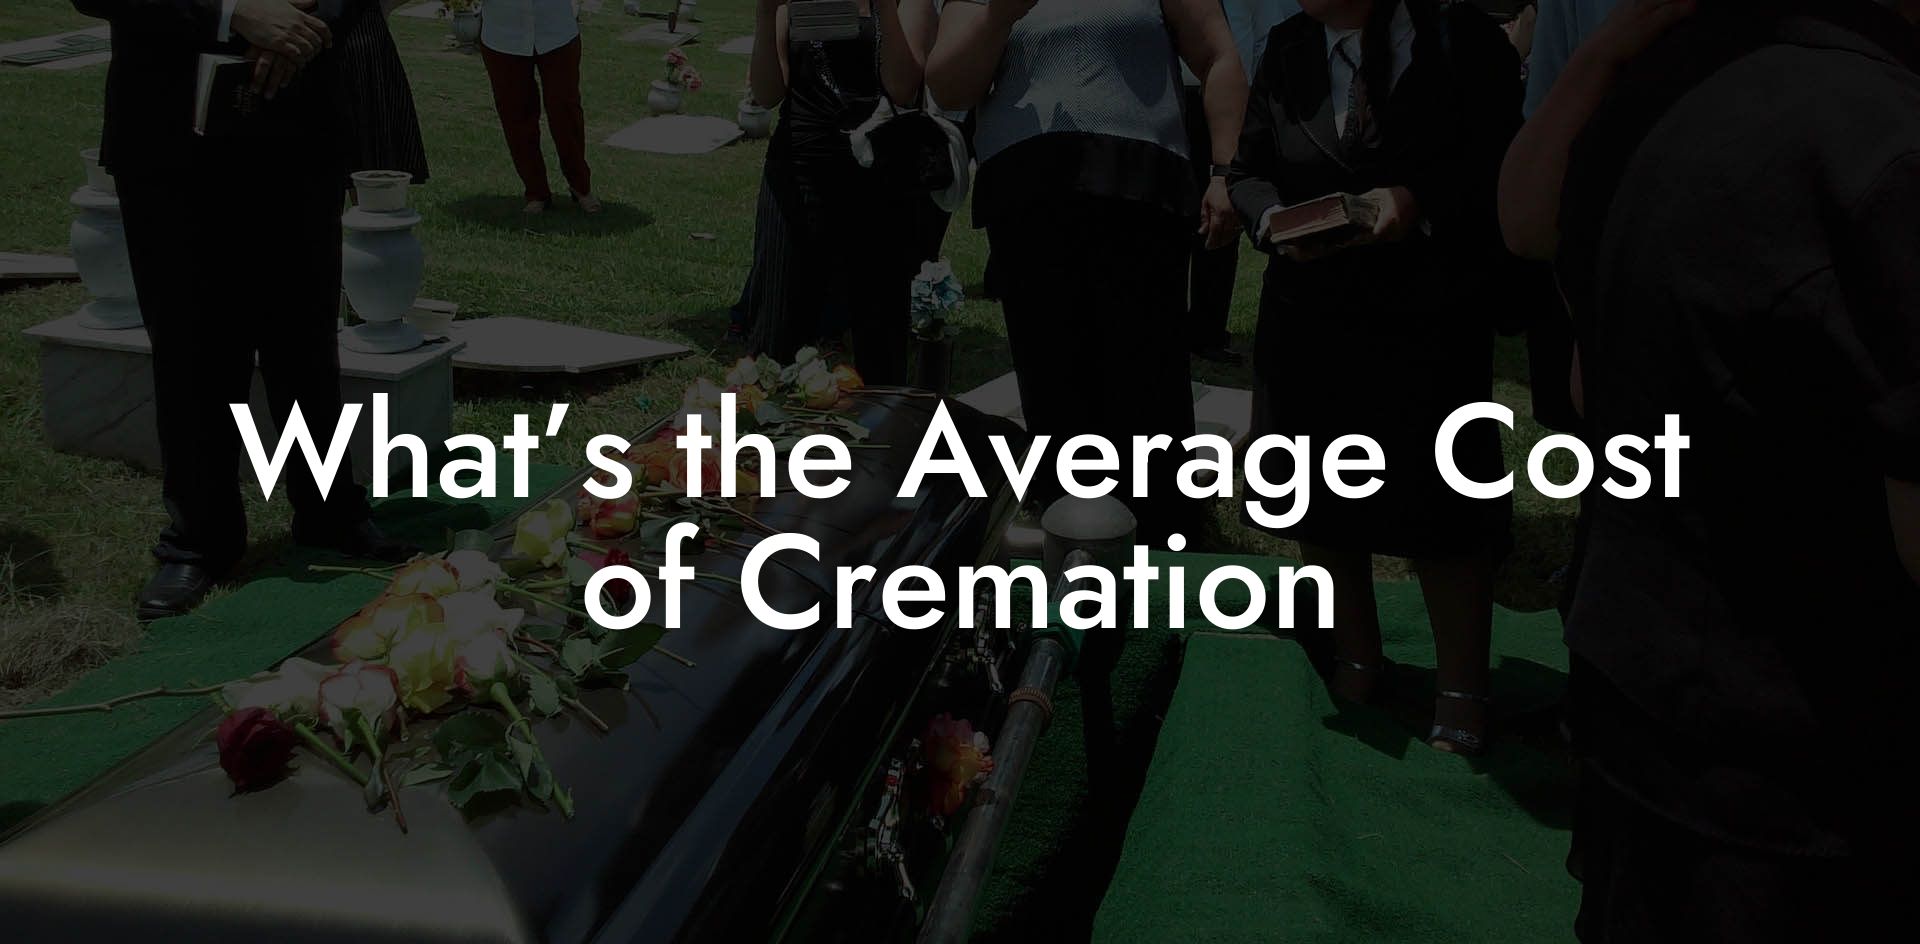 What’s the Average Cost of Cremation